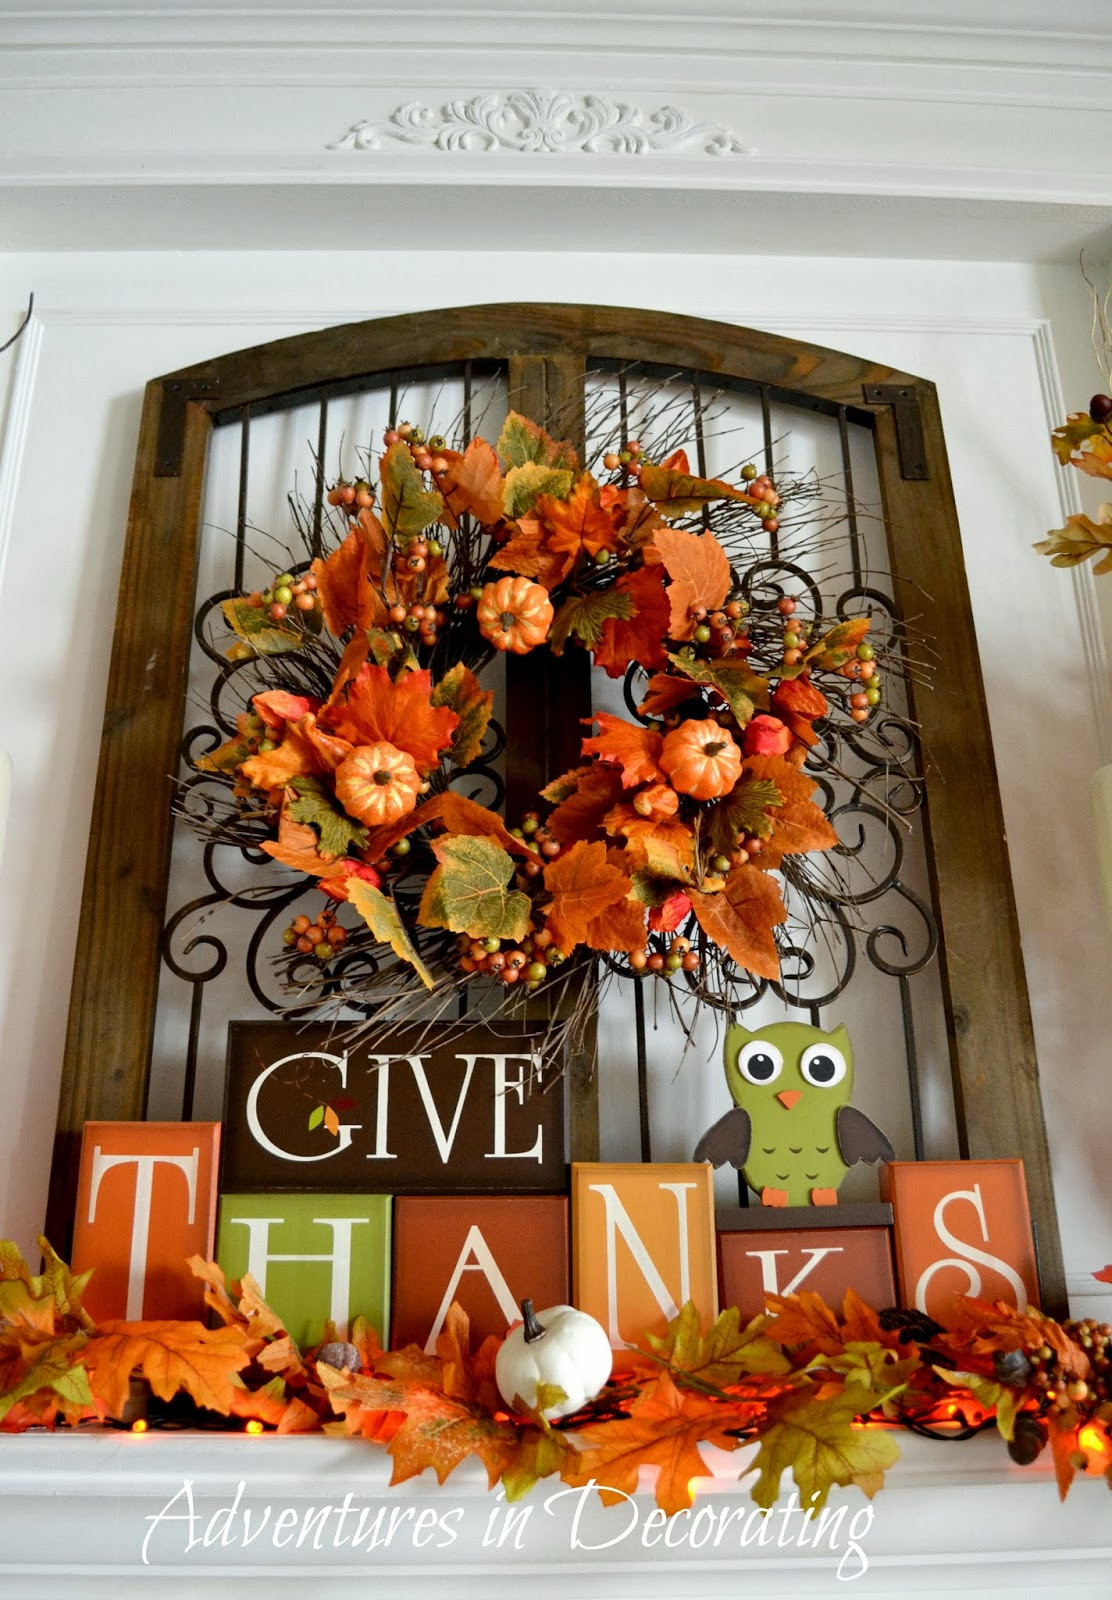 Thanksgiving Fireplace Decor
 Adventures in Decorating Our Fall Mantel